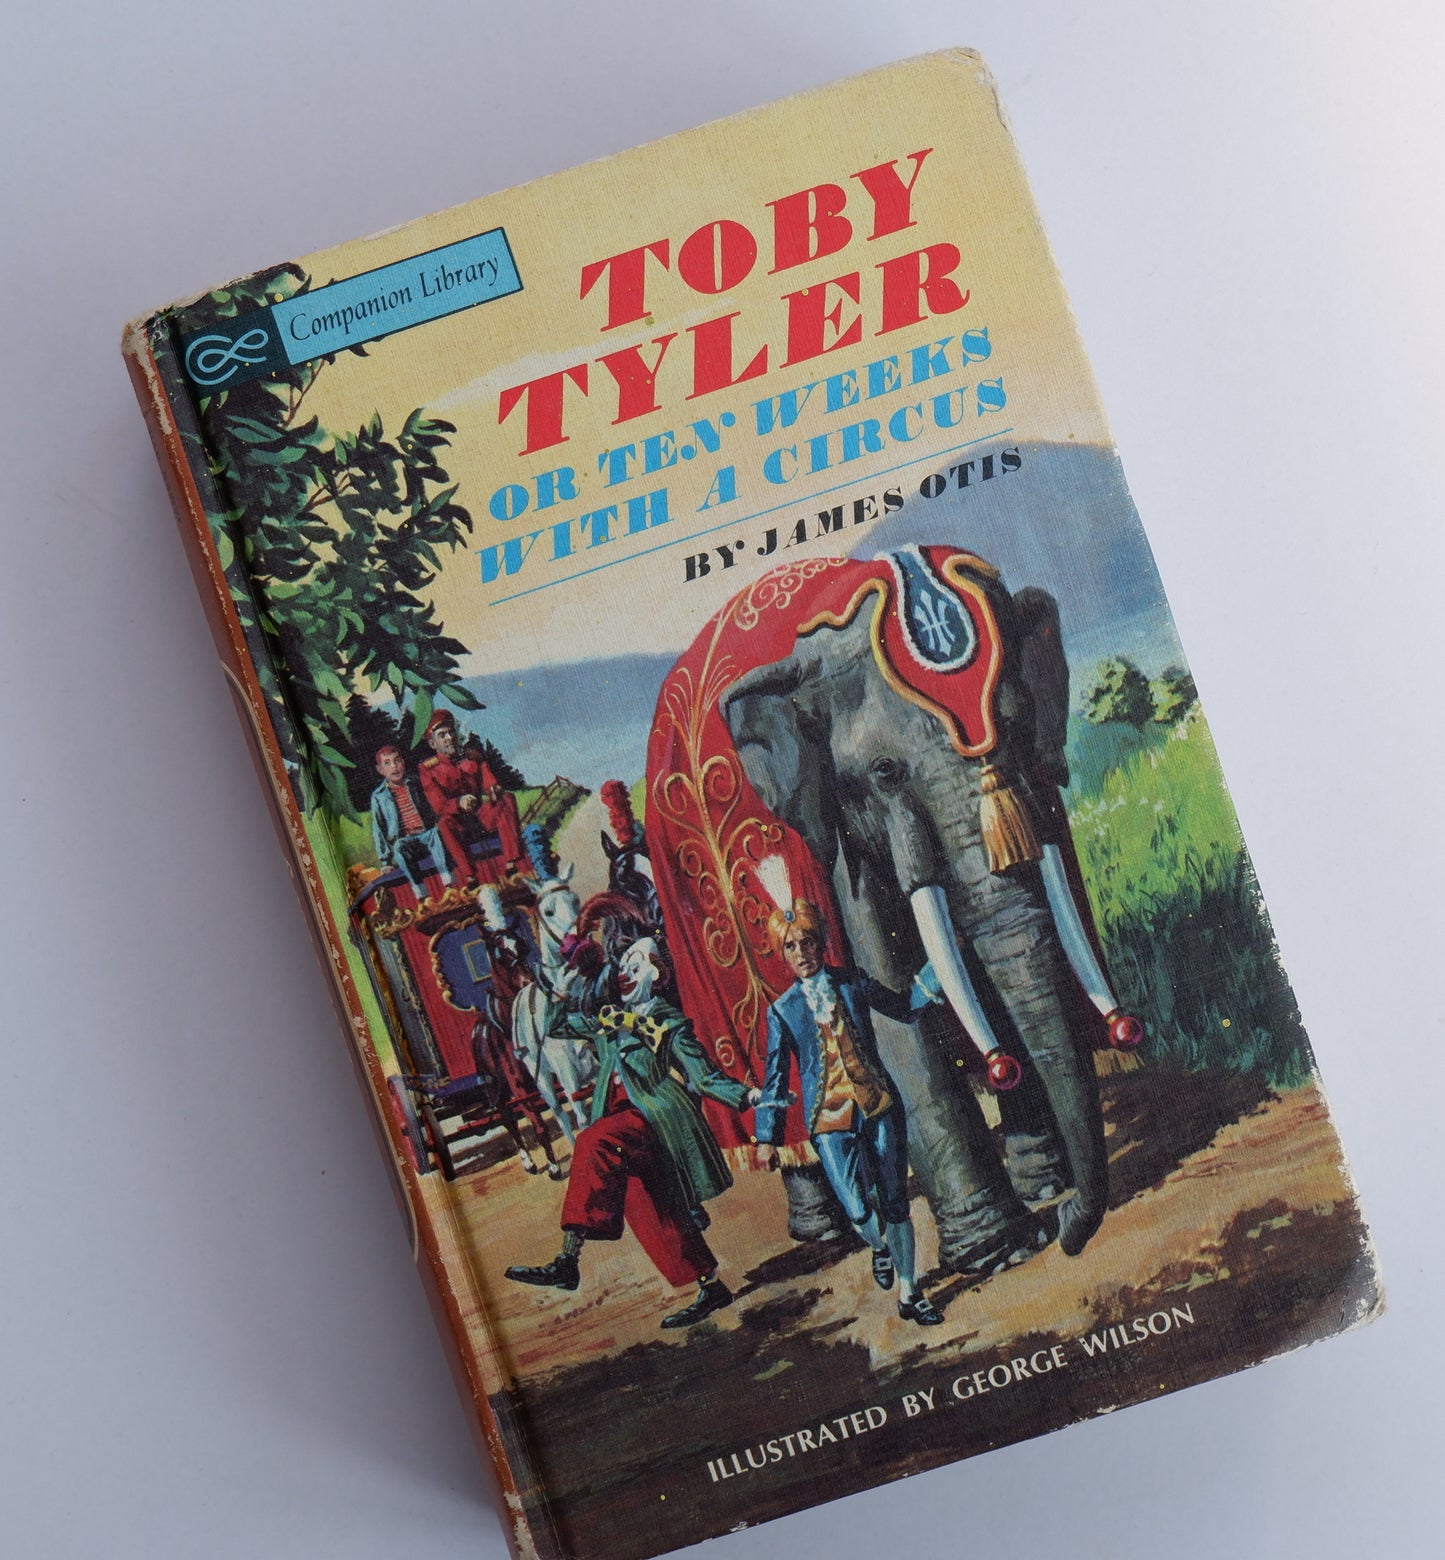 Rip Van Winkle, the legend of Sleepy Hollow and other stories/Toby Tyler or ten weeks with a circus - Companion Library